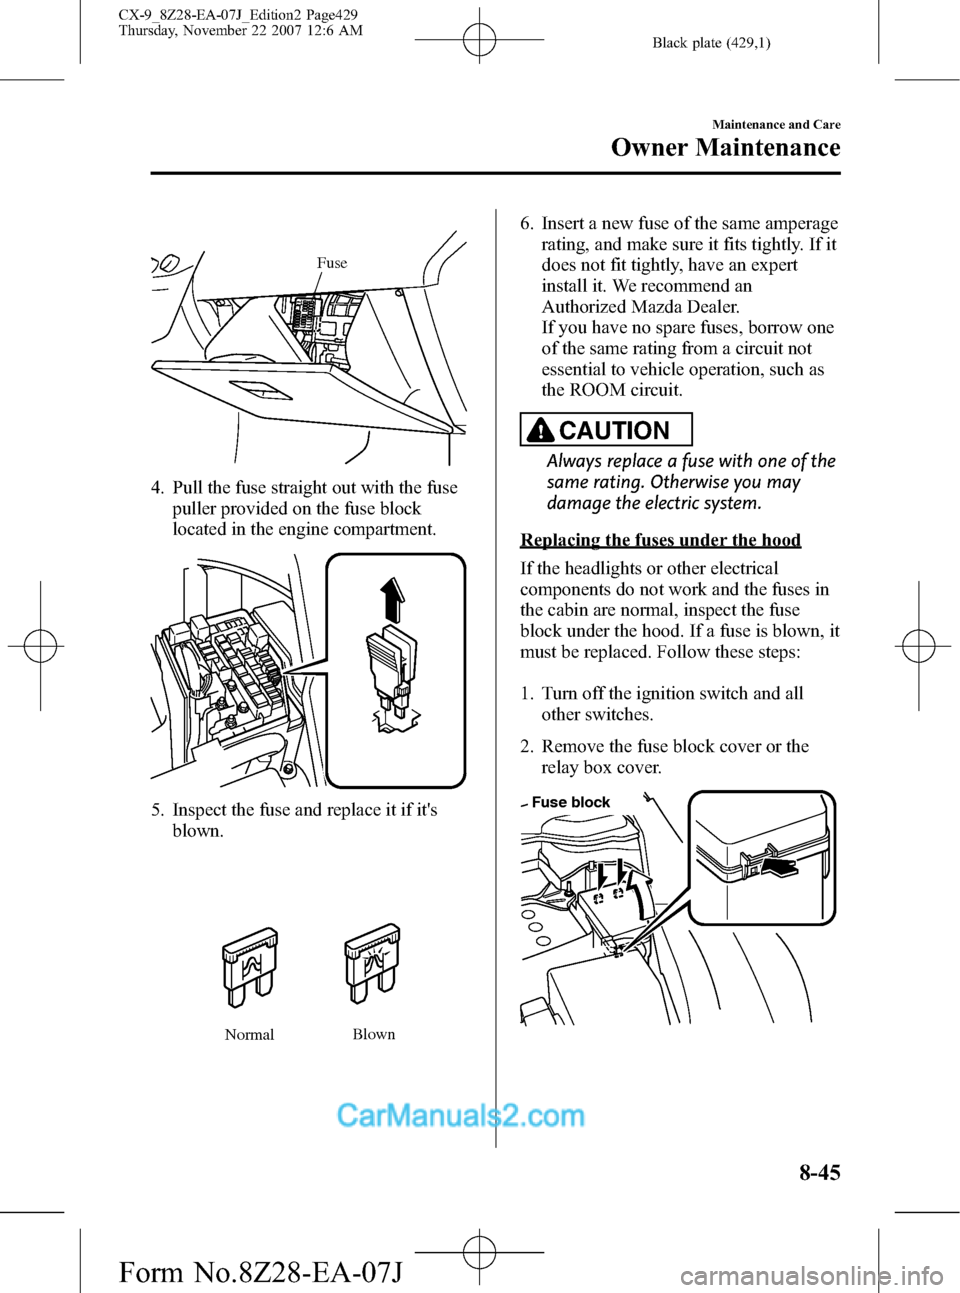 MAZDA MODEL CX-9 2008  Owners Manual (in English) Black plate (429,1)
Fuse
4. Pull the fuse straight out with the fuse
puller provided on the fuse block
located in the engine compartment.
5. Inspect the fuse and replace it if its
blown.
NormalBlown
